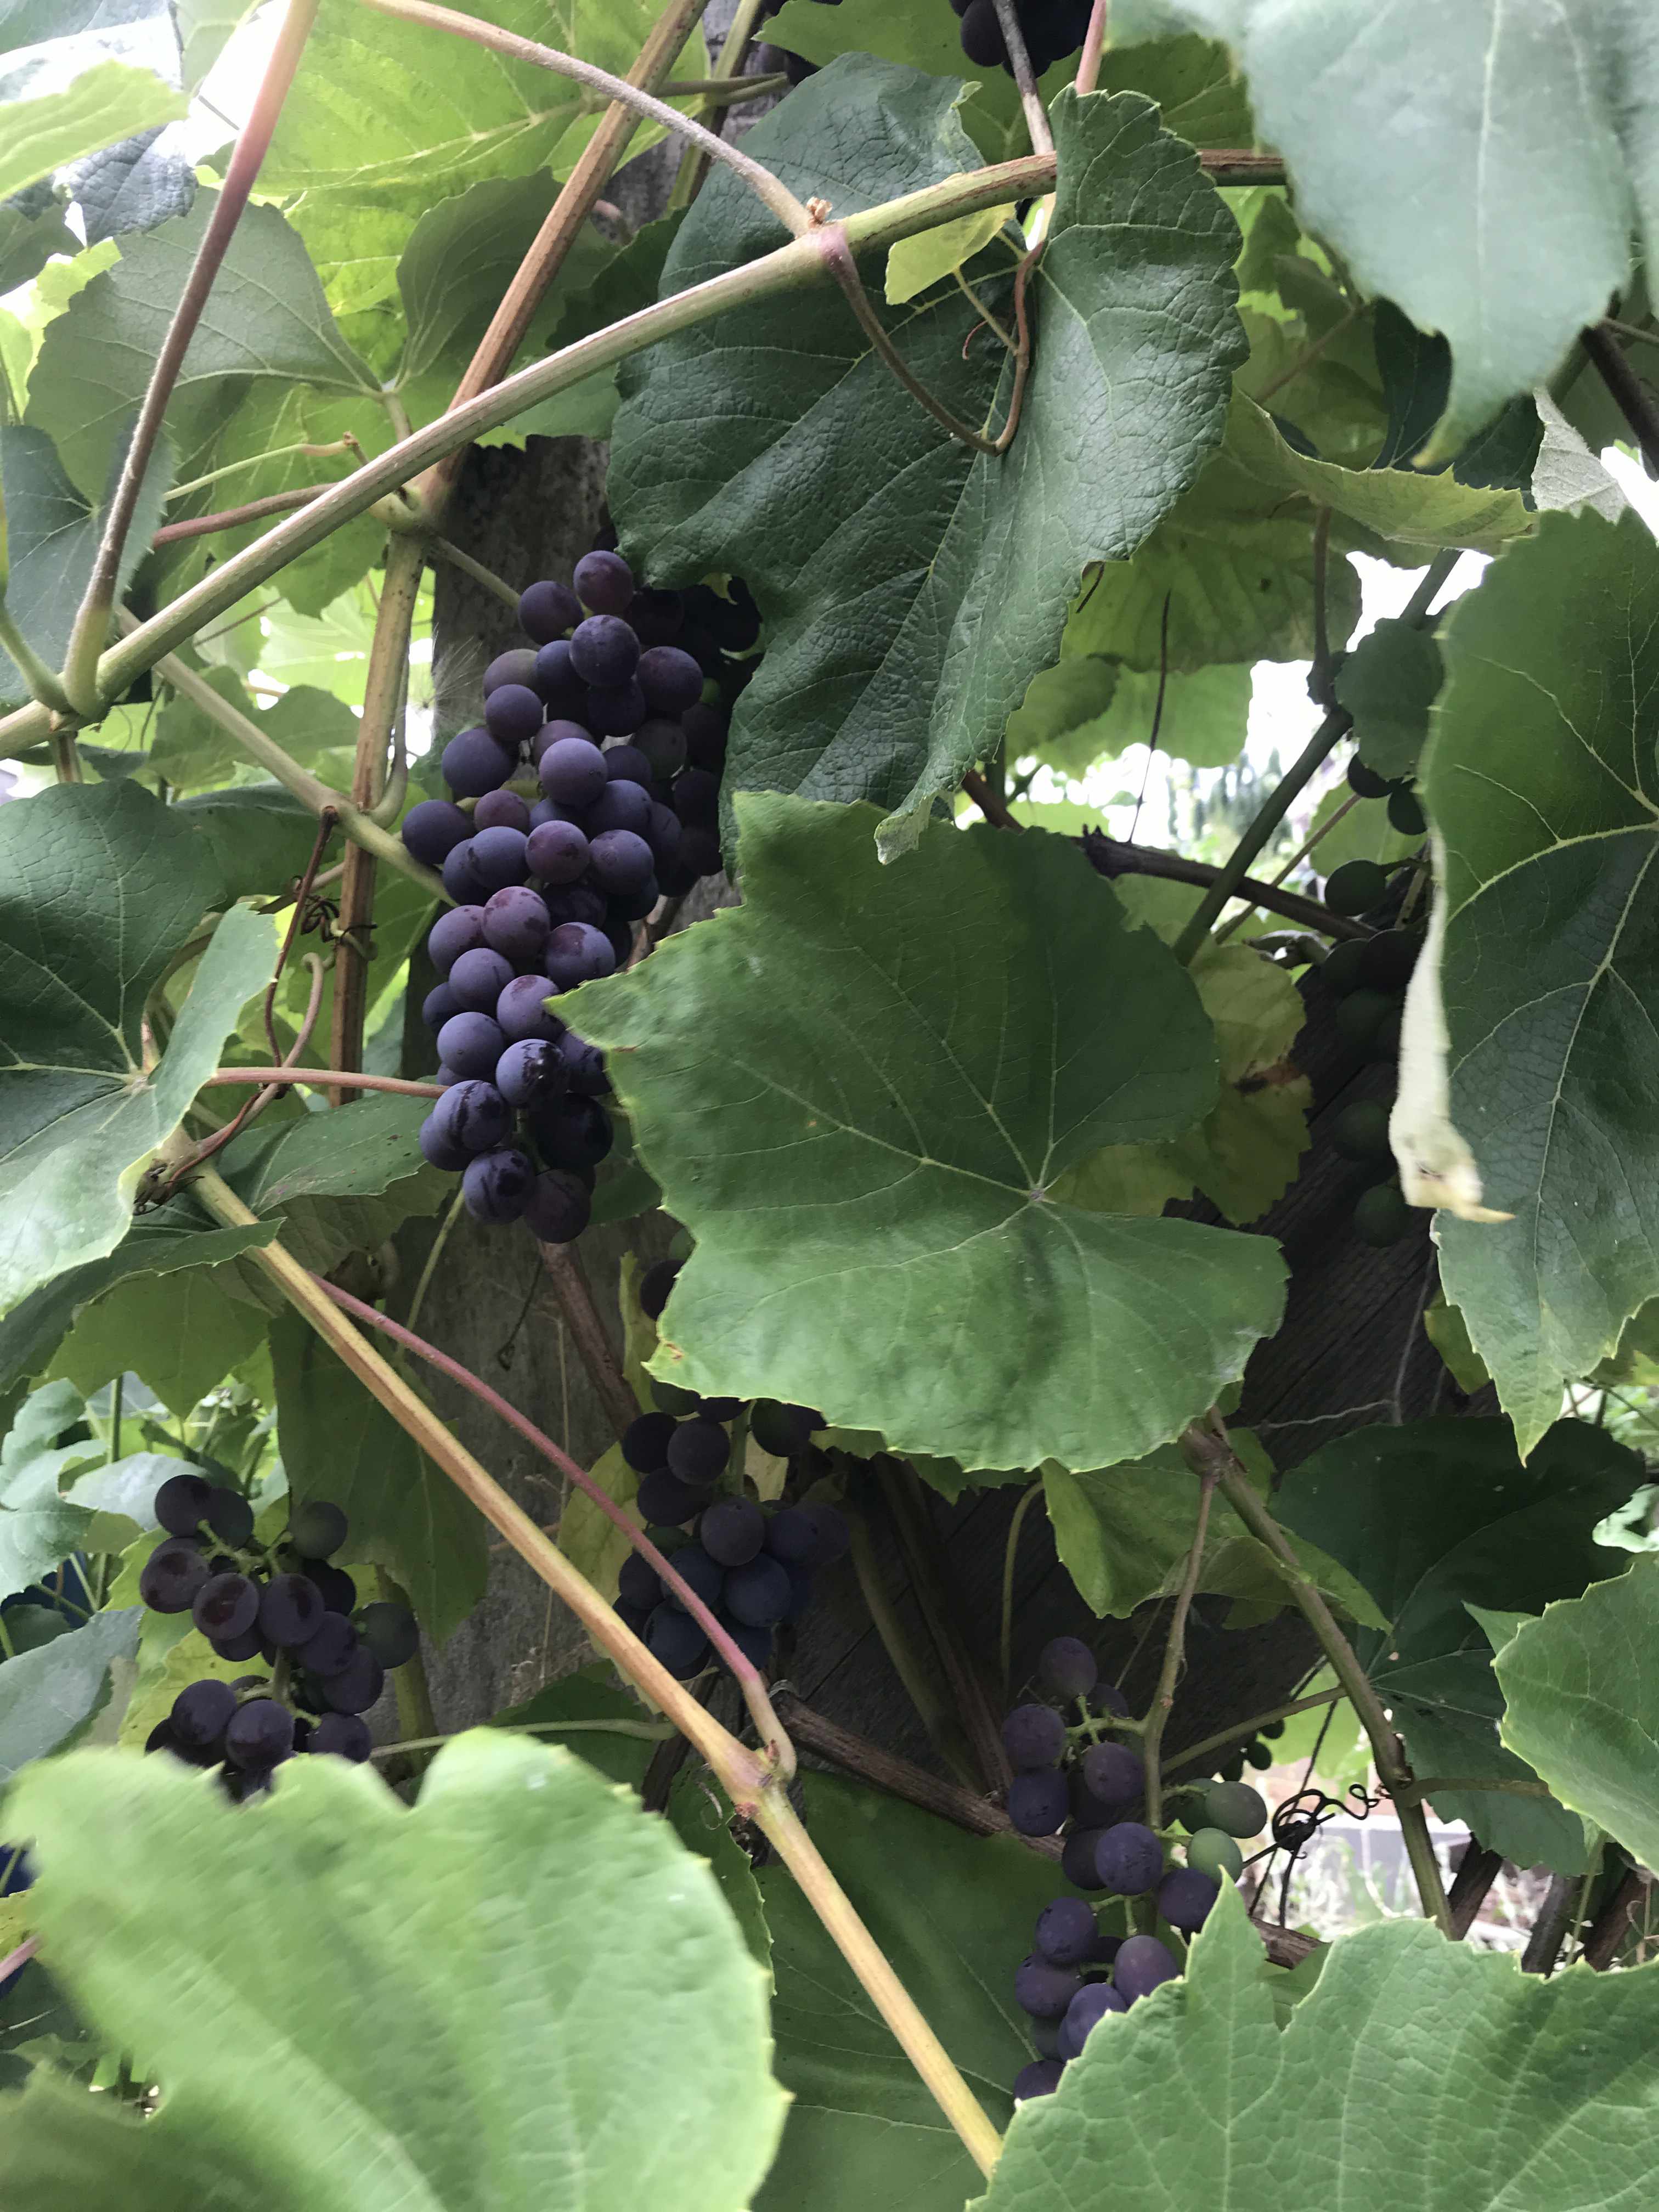 grape leaves and a big bunch of grapes growing in the garden